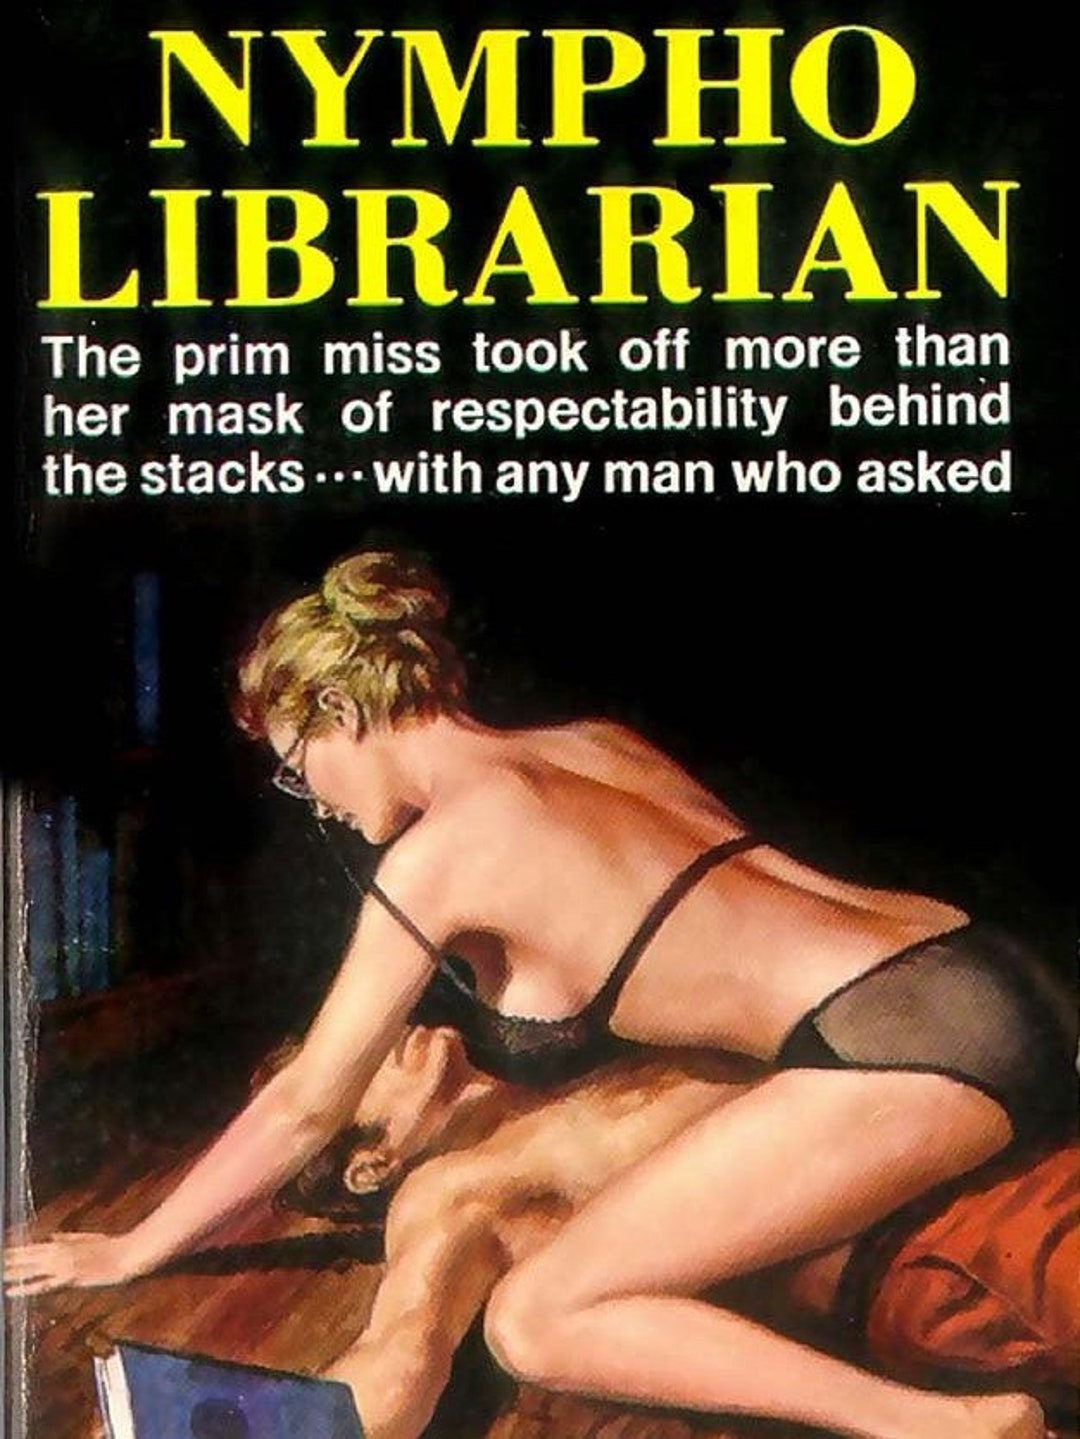 Nymphomaniac librarian in 'The Wicker Man' – REEL LIBRARIANS